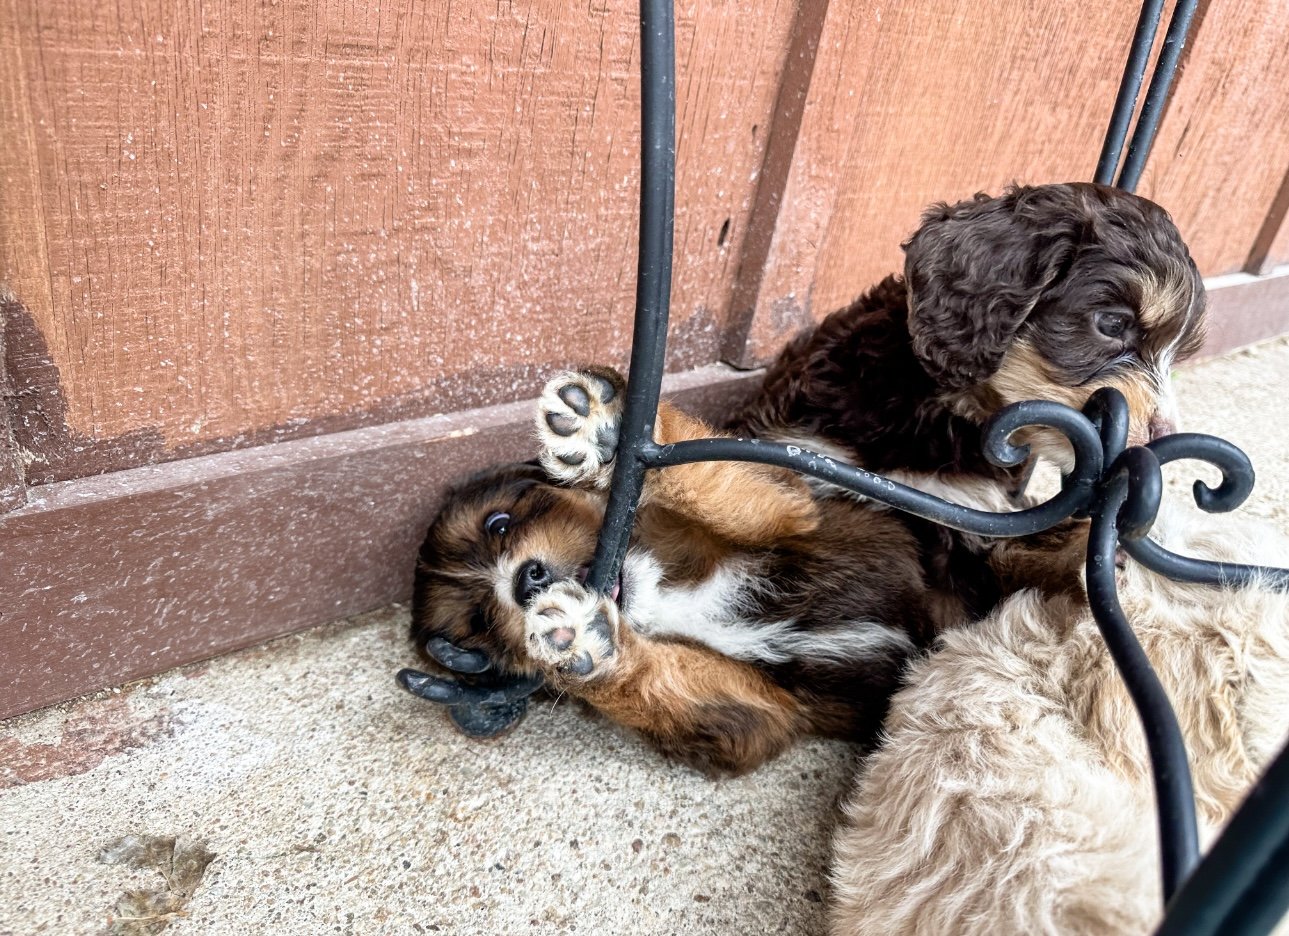 sable bernedoodle puppies